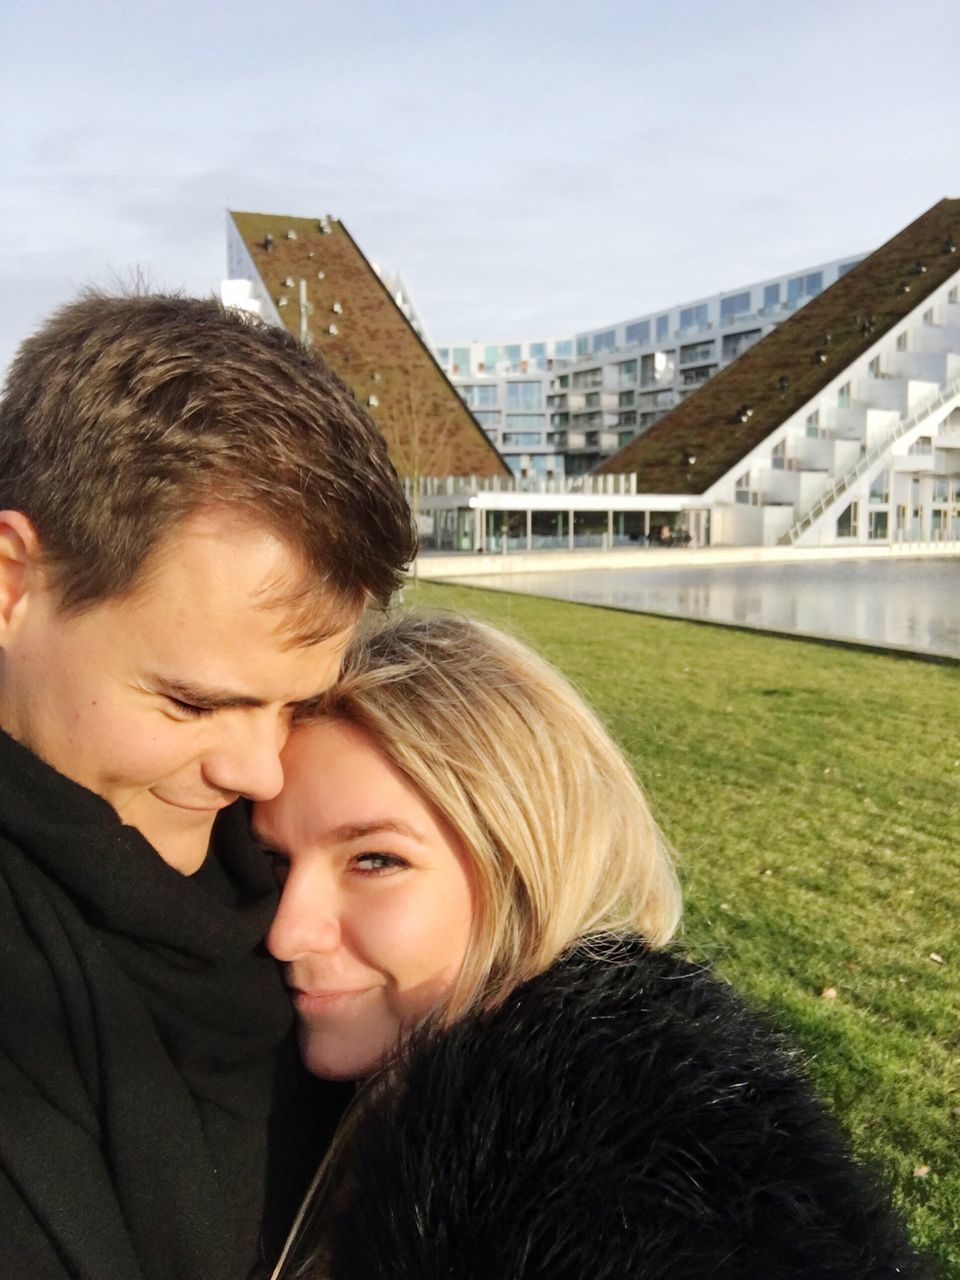 two people, love, togetherness, women, happiness, headshot, bonding, city, architecture, embracing, outdoors, smiling, blond hair, young women, leisure activity, building exterior, built structure, sky, cheerful, real people, day, portrait, men, adult, young adult, couple, people, cityscape, adults only